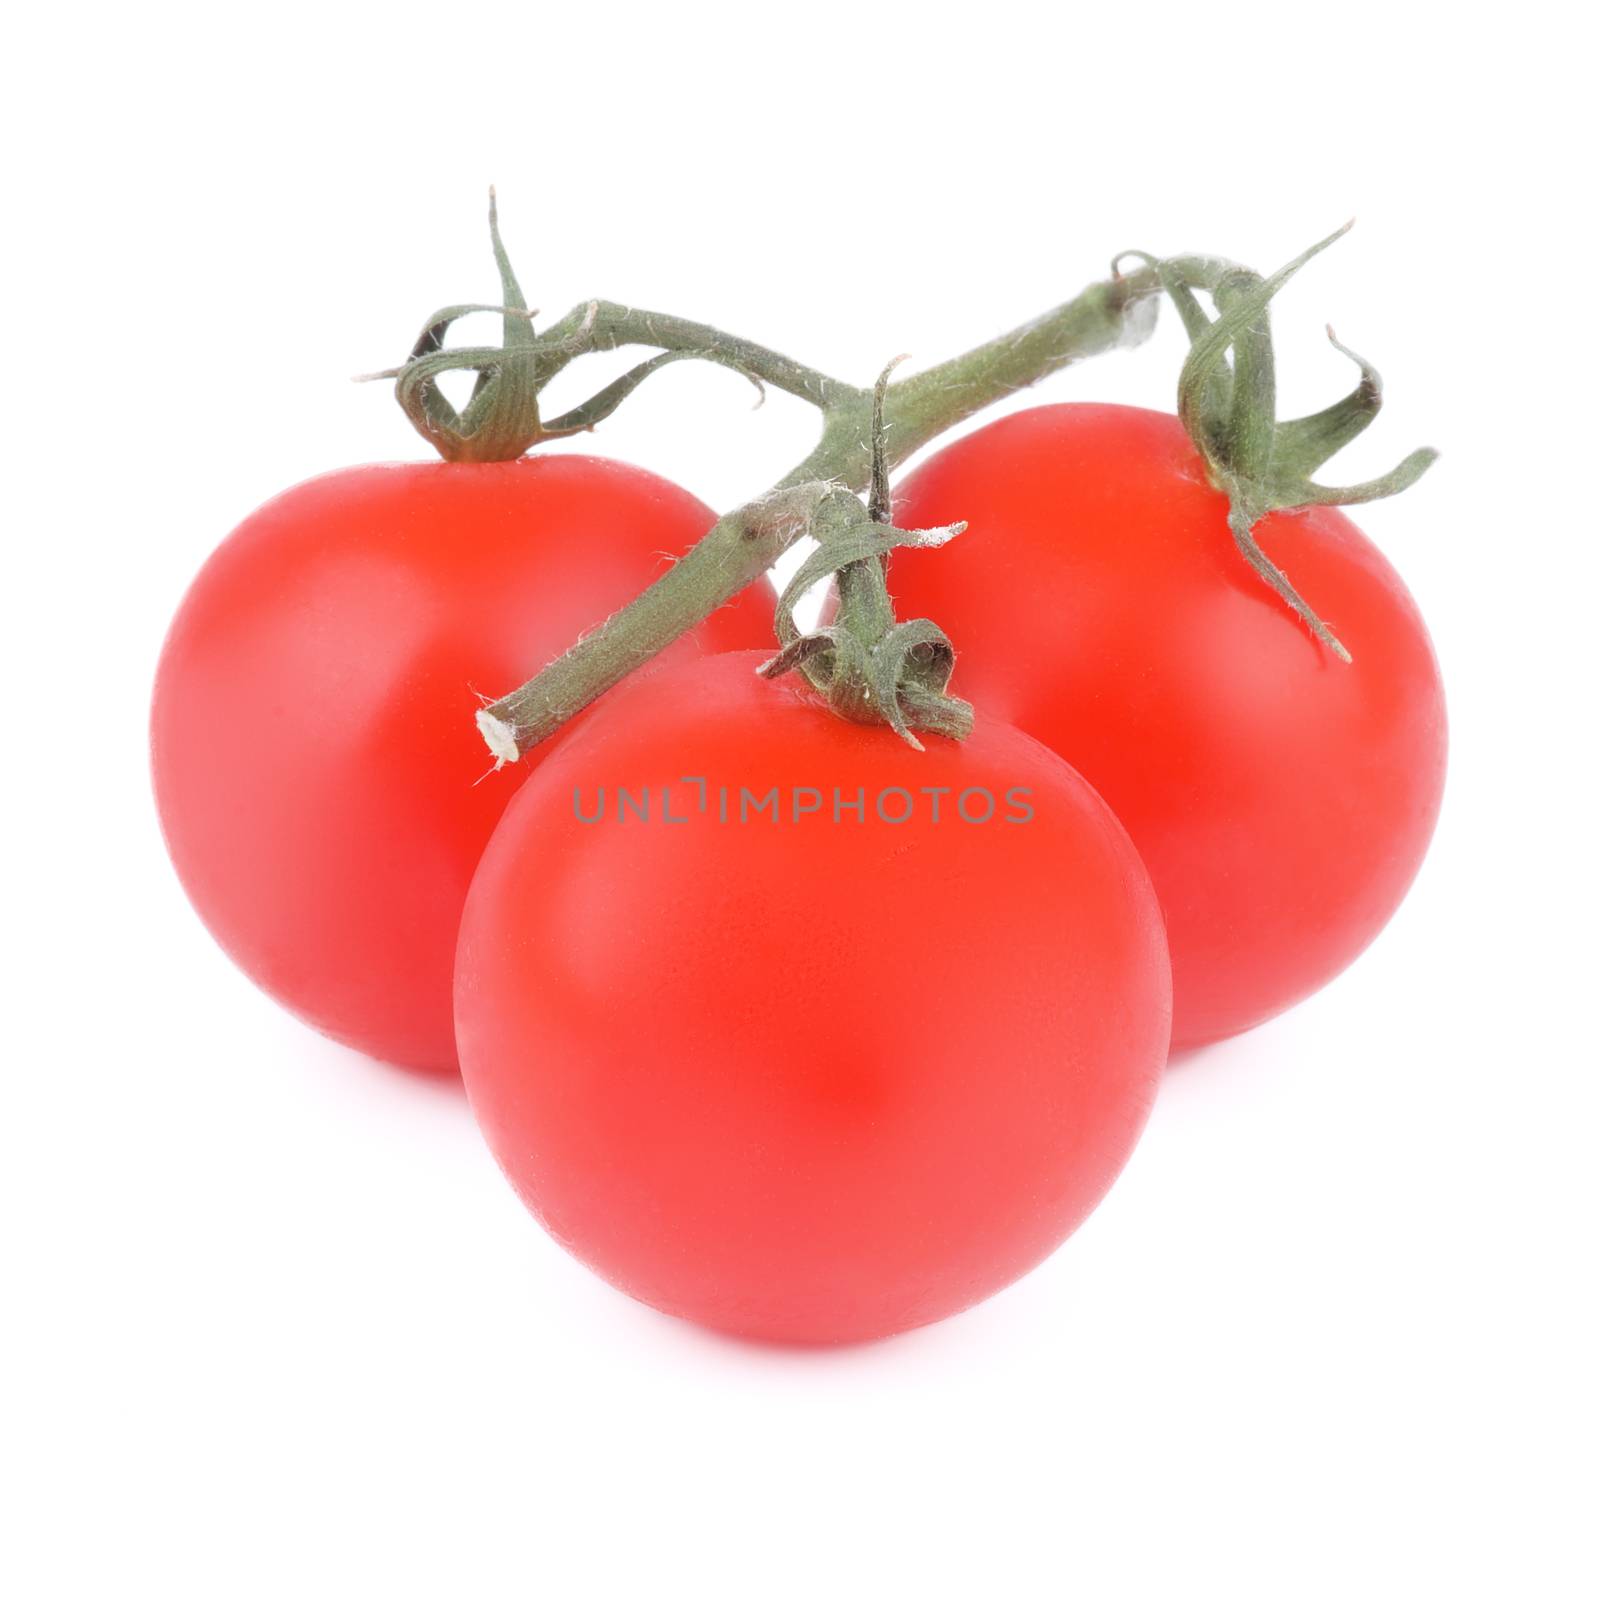 Three Ripe Tomatoes with Twigs and Stems isolated on white background